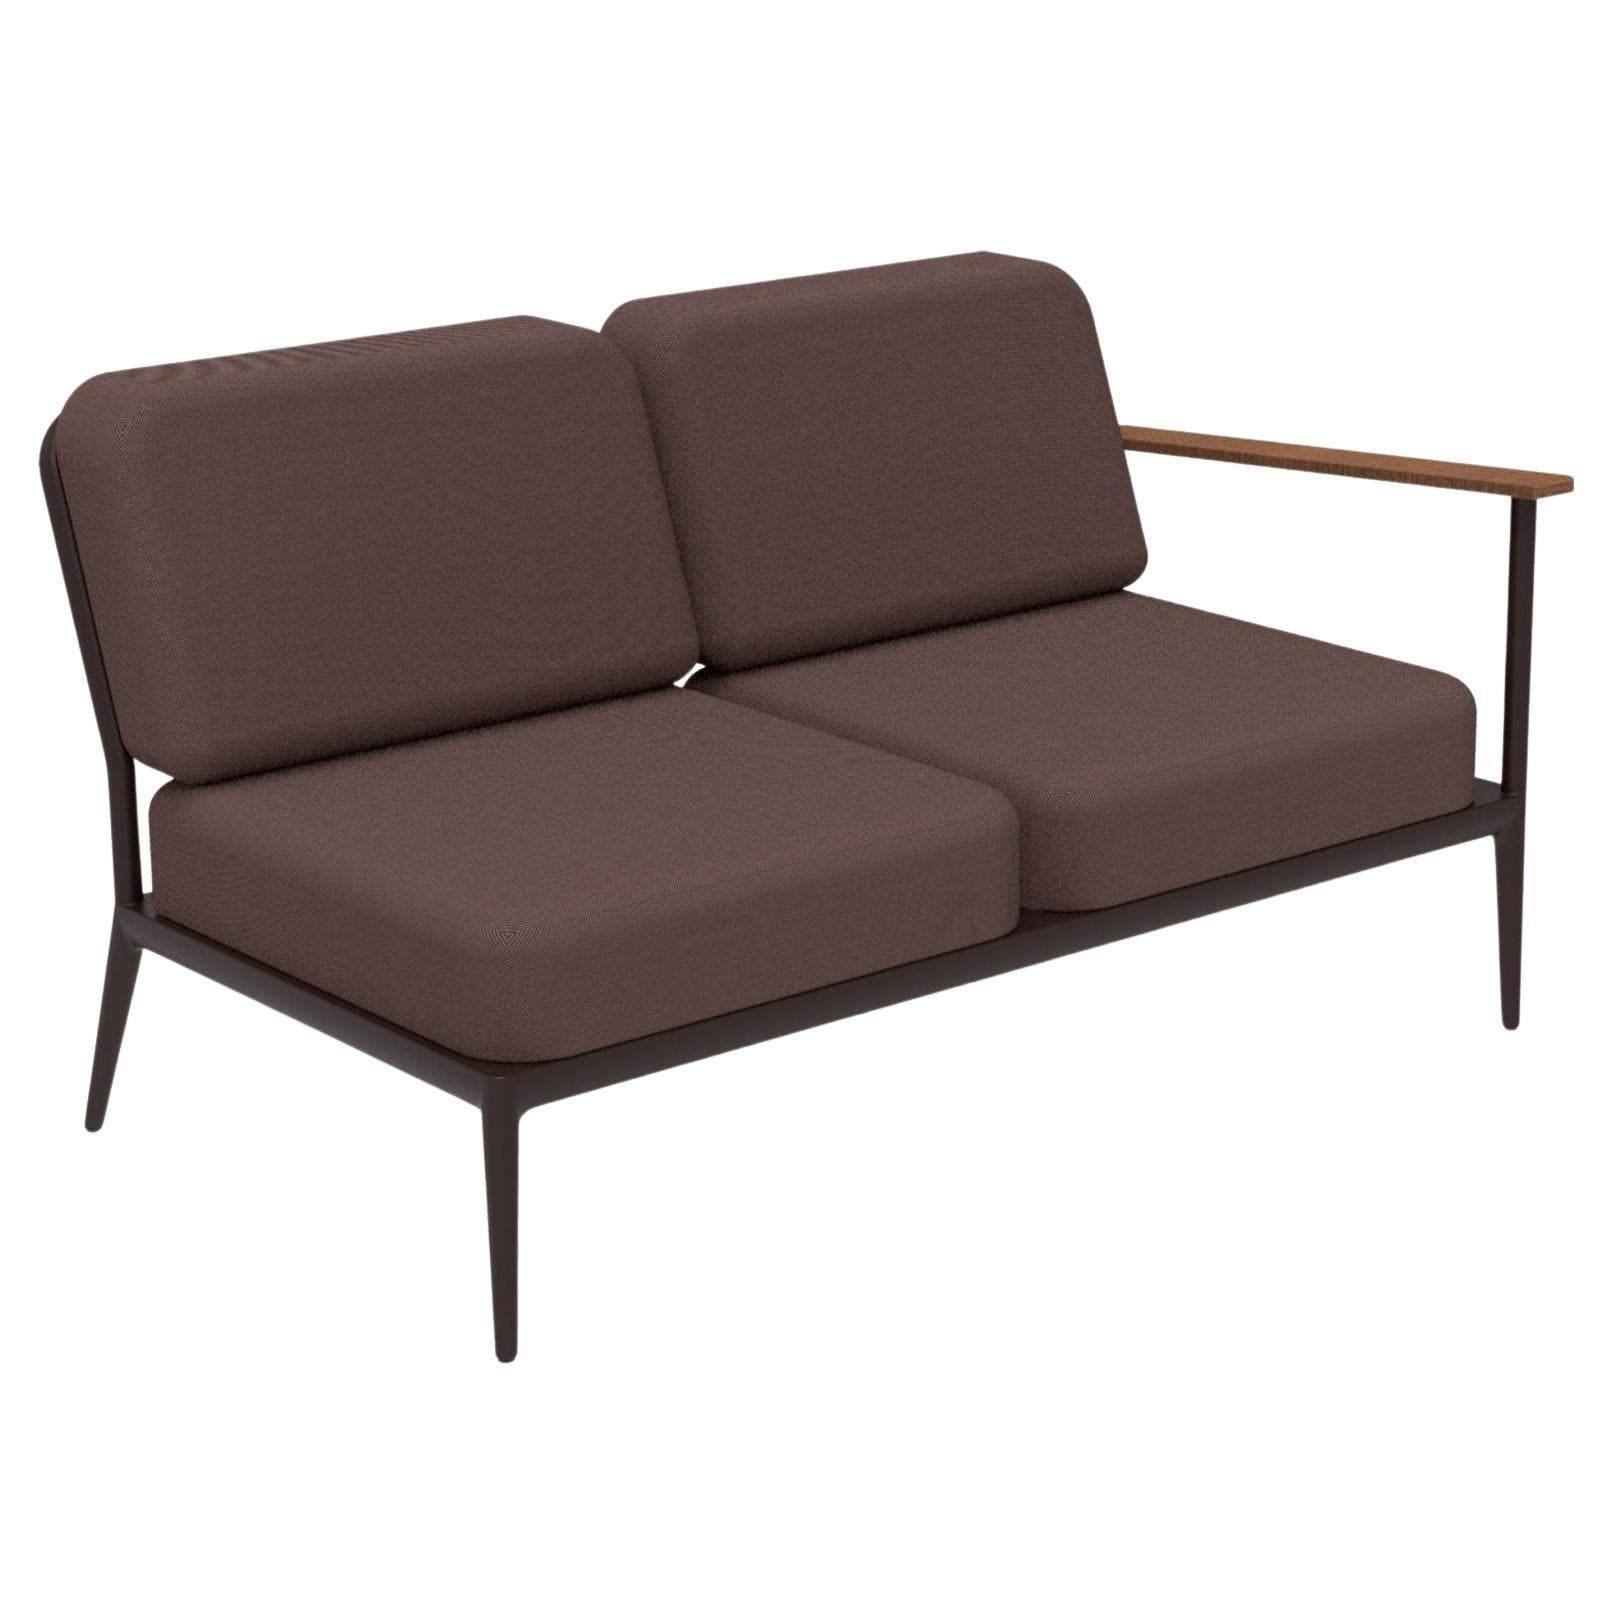 Nature Chocolate Double Left Modular Sofa by MOWEE For Sale